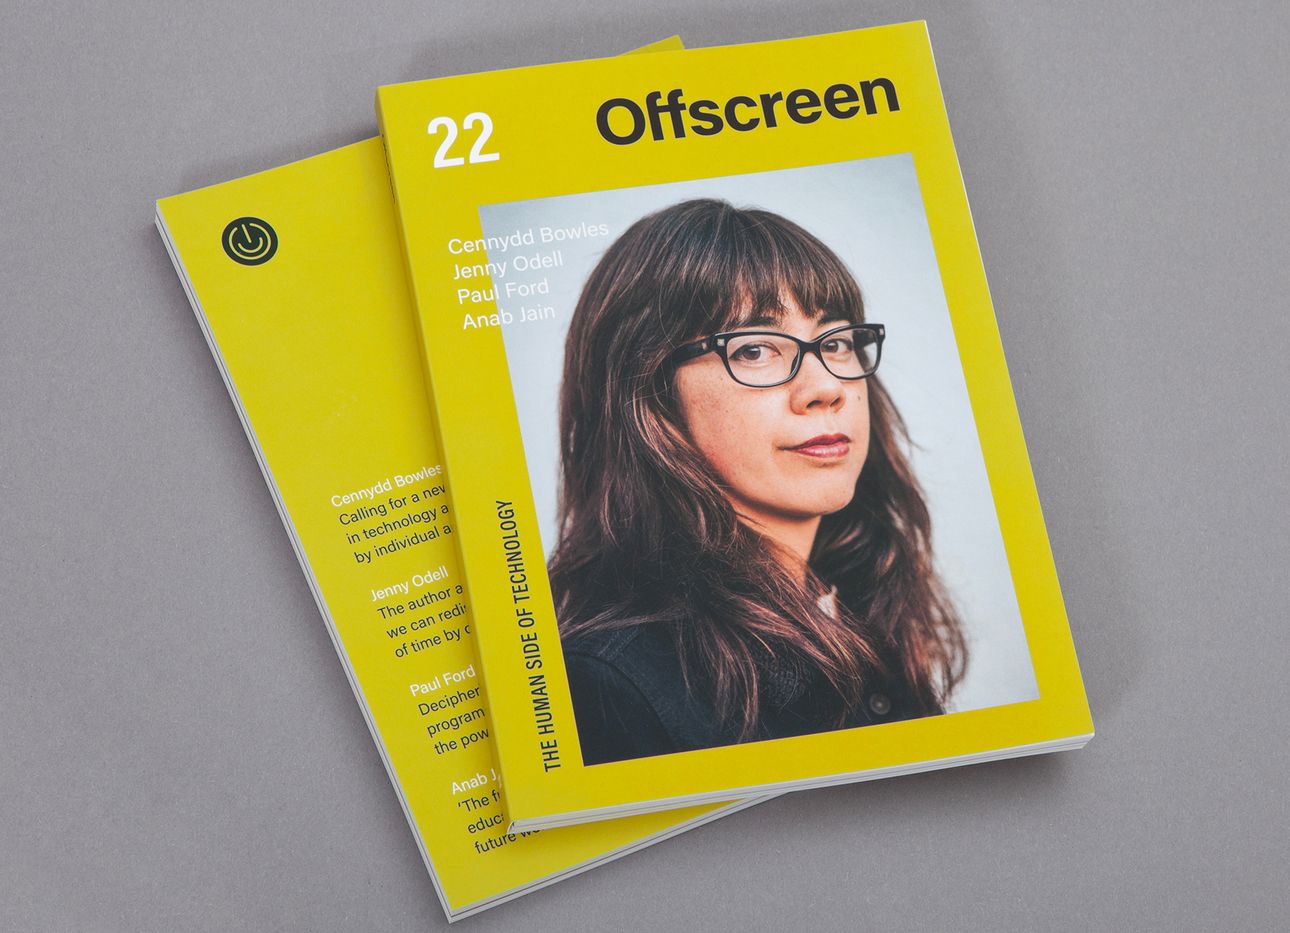 Two copies of Offscreen magazine featuring a woman with black glasses on the front cover.